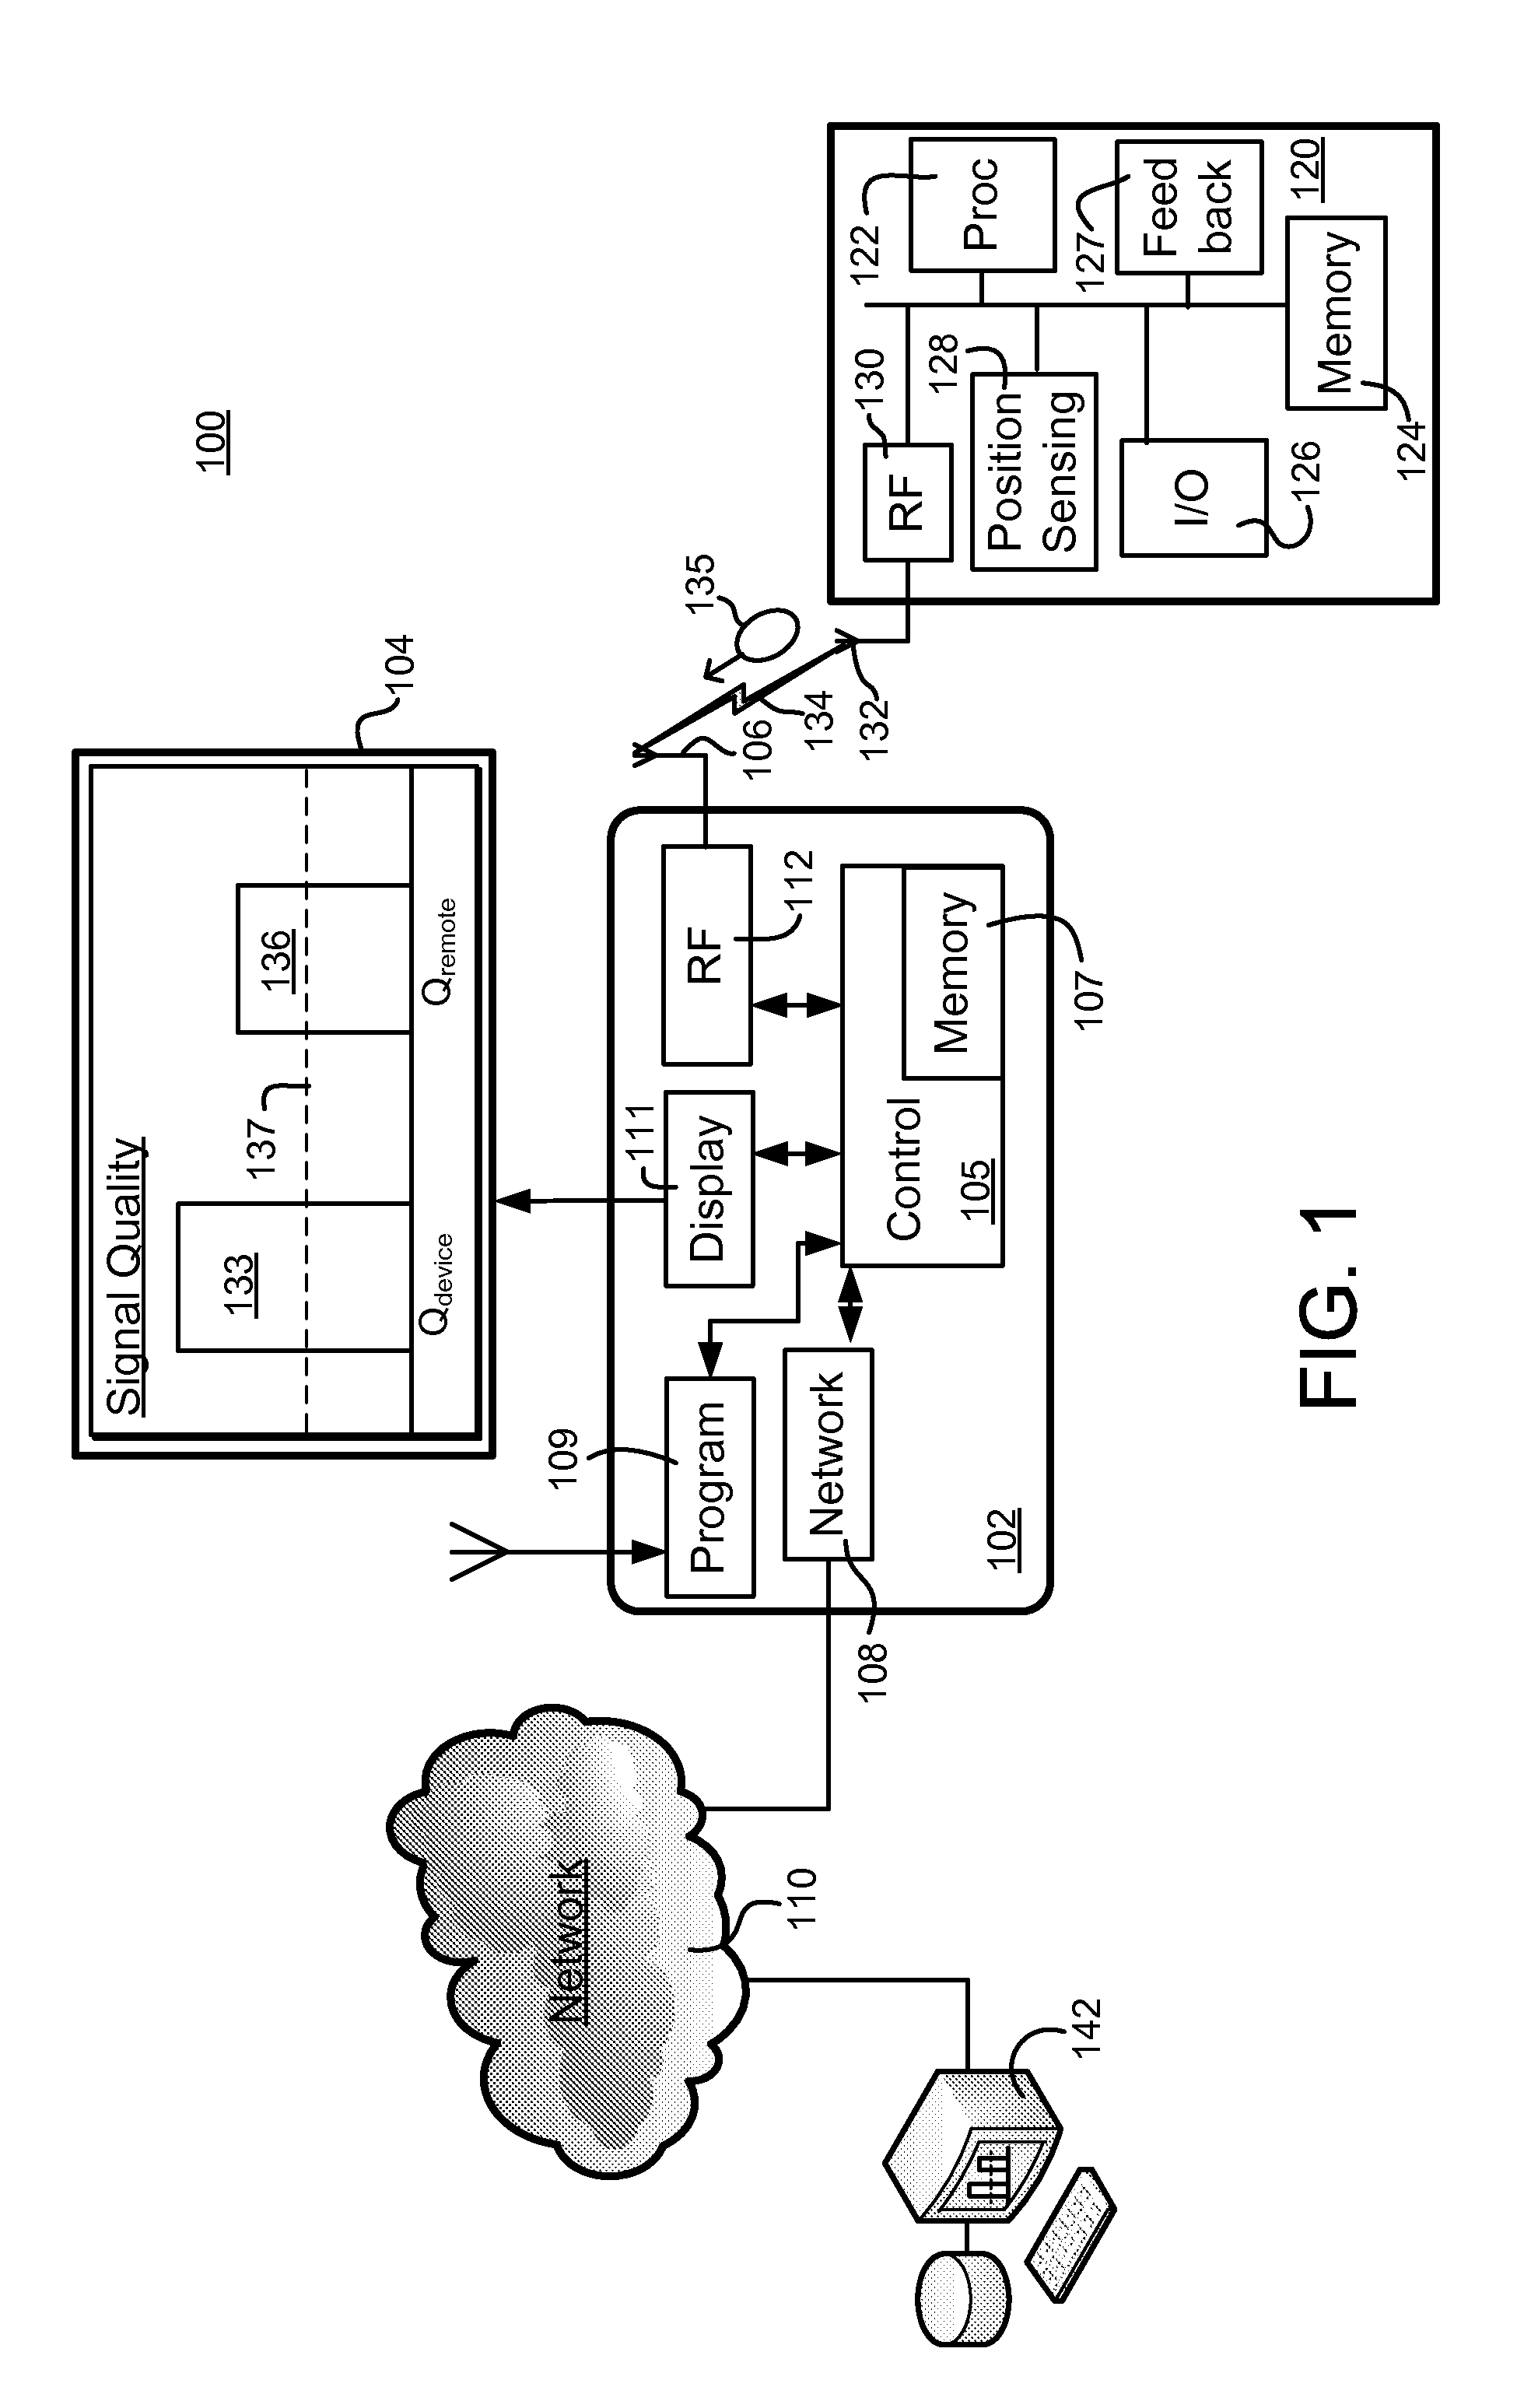 Systems, methods and devices for providing feedback about a quality of communication between a device and a remote control